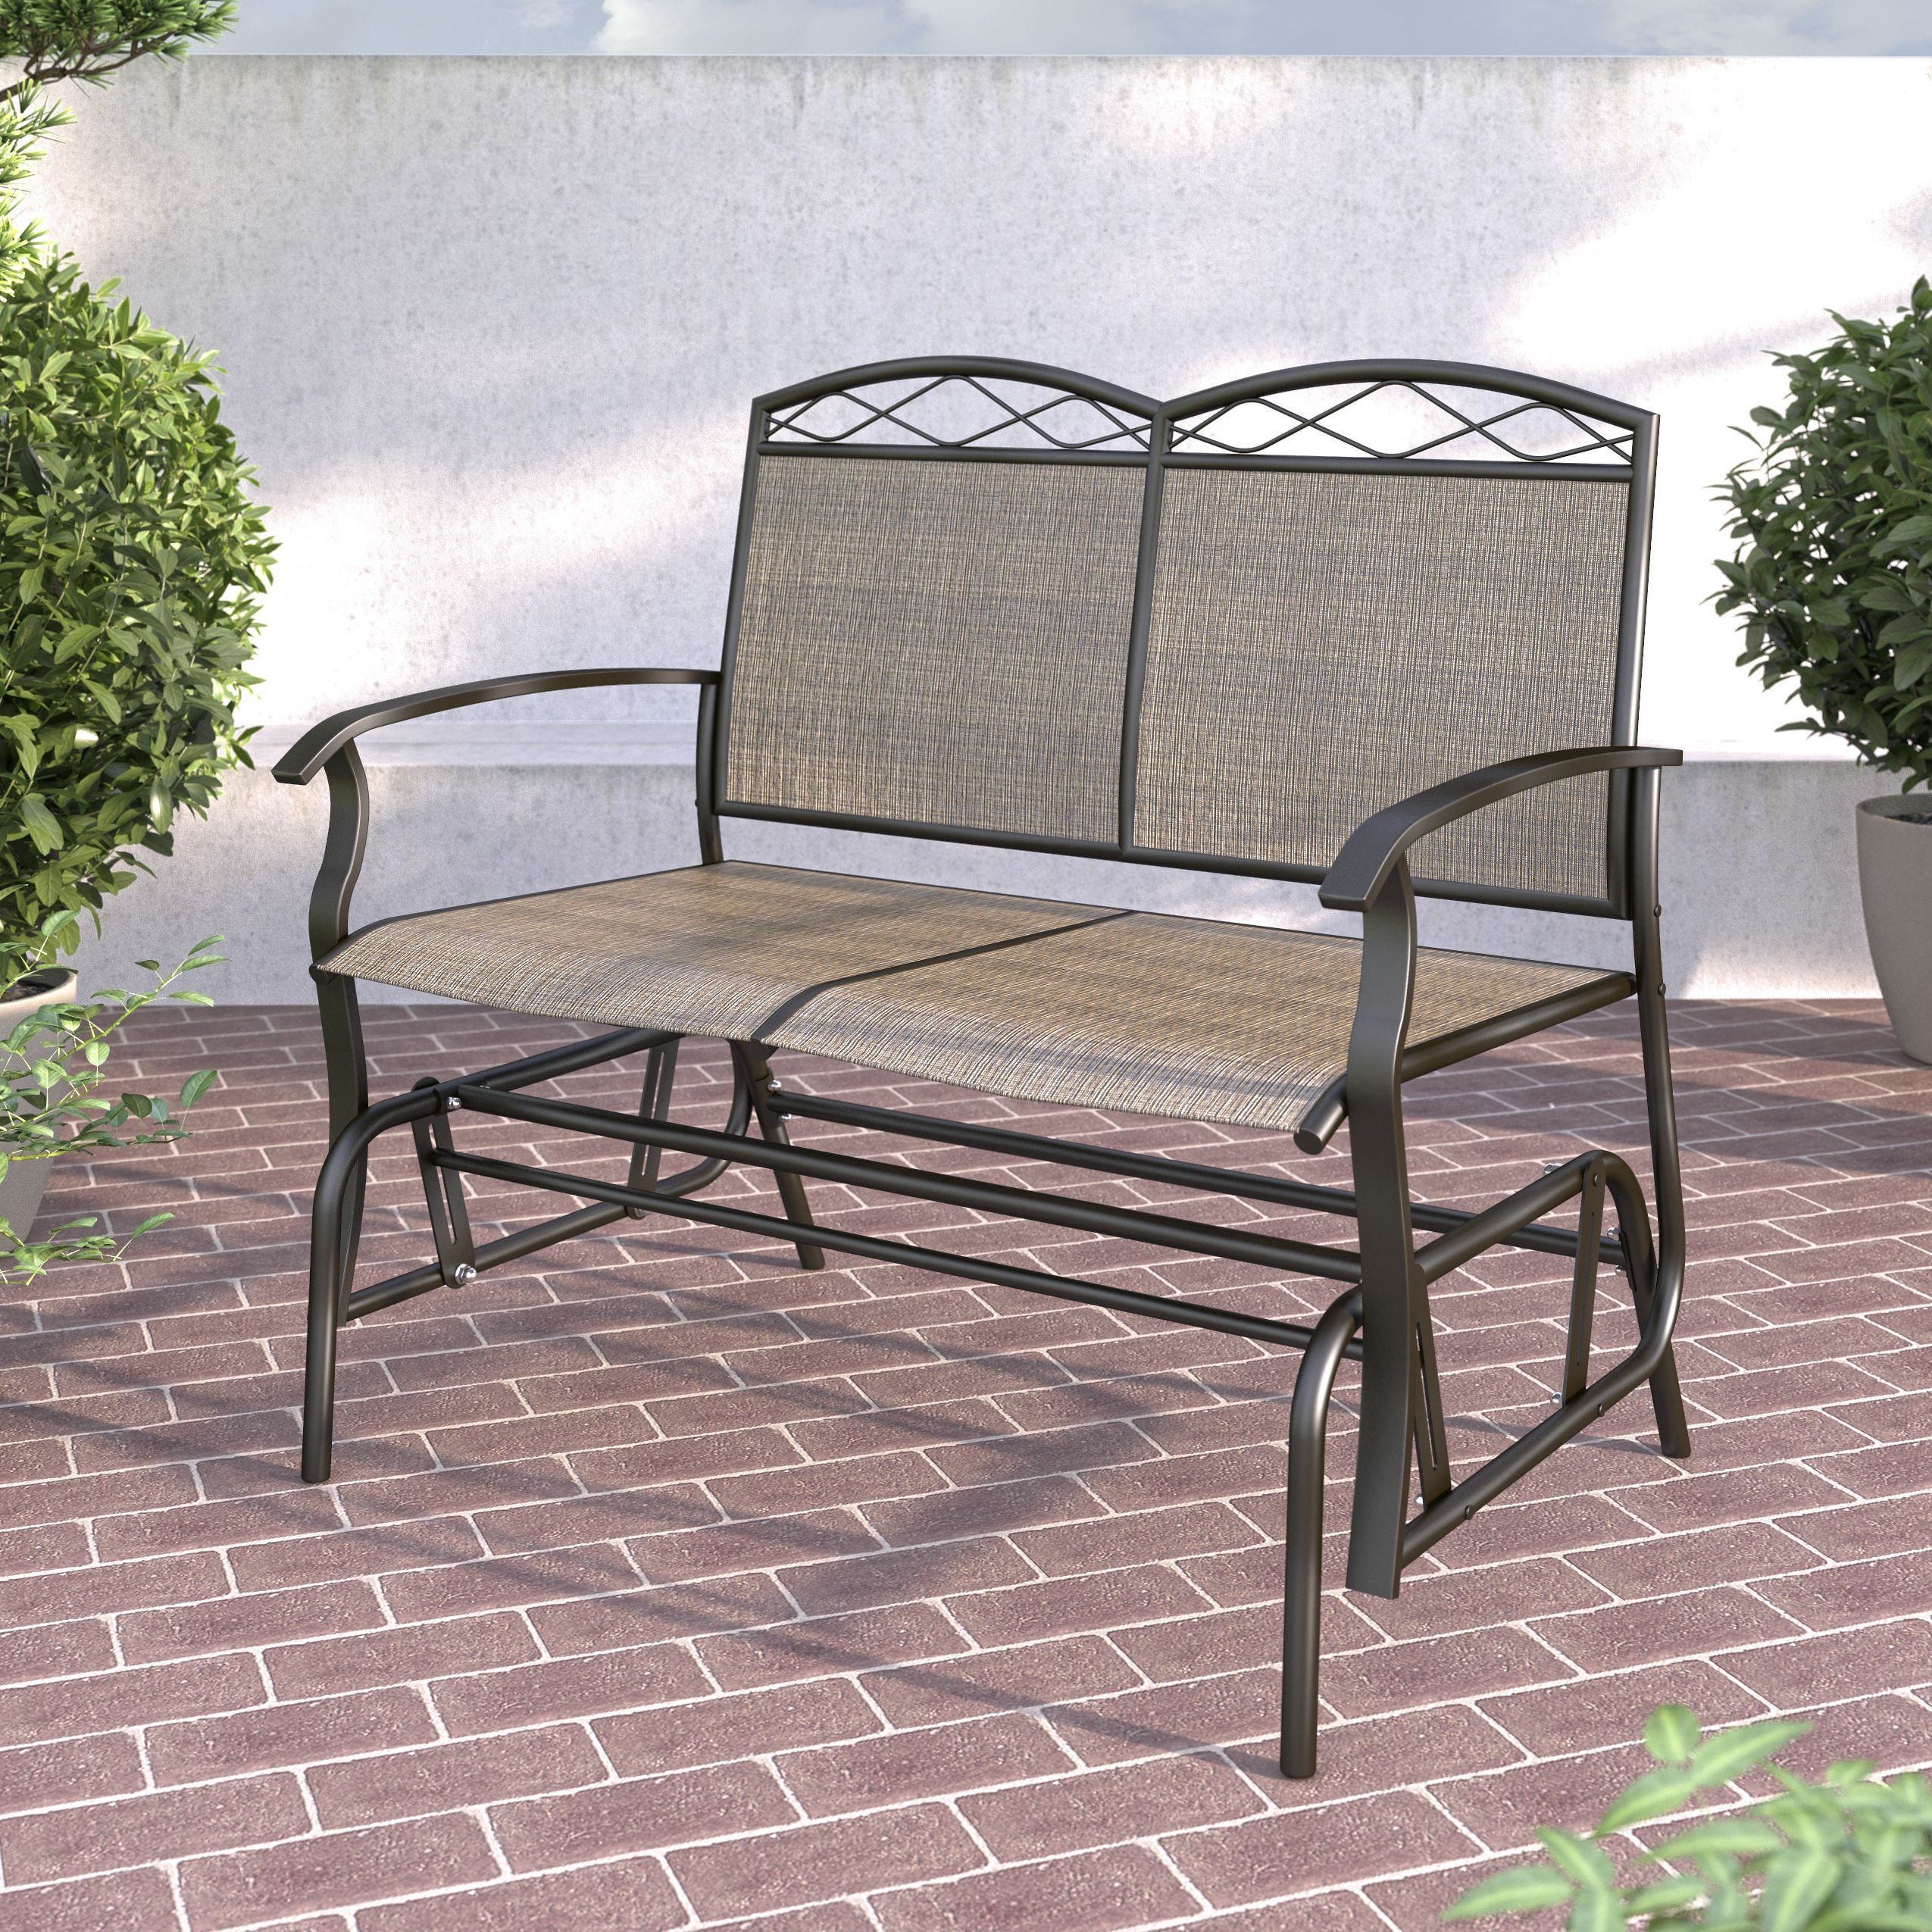 Havenside Home Fox Bay Speckled Brown Patio Double Glider Intended For Popular Speckled Glider Benches (View 1 of 30)